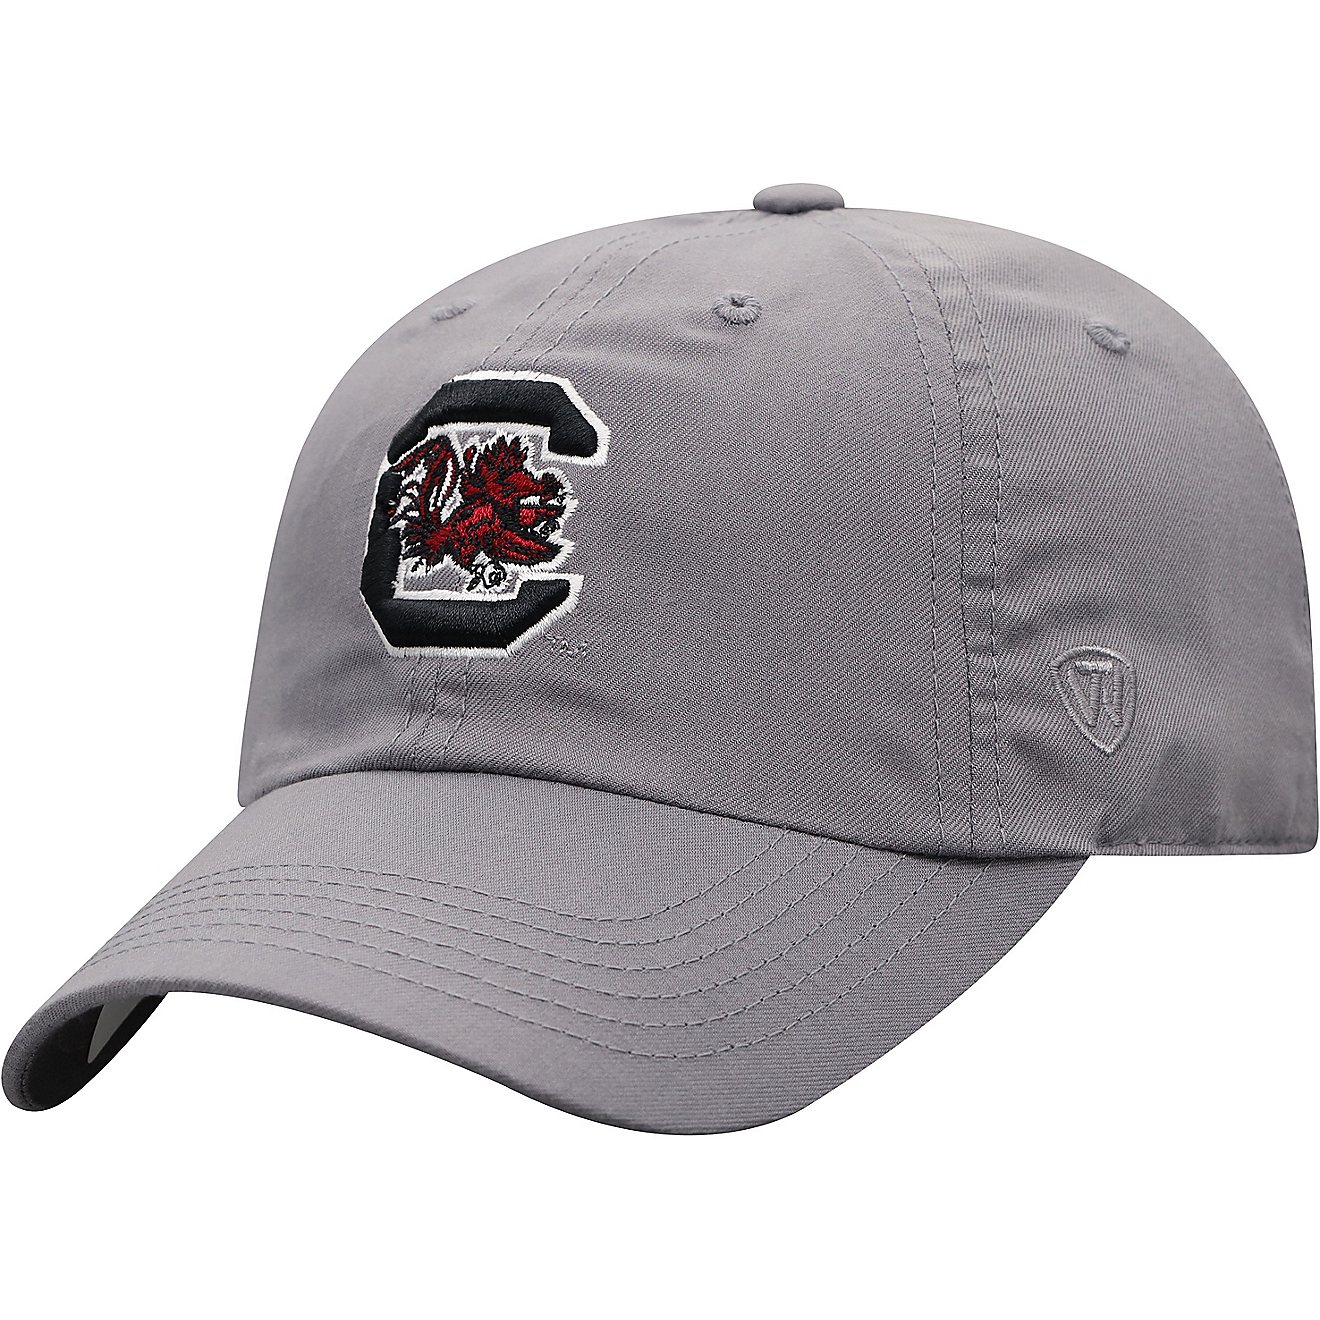 Top of the World Men's University of South Carolina Staple Cap                                                                   - view number 3